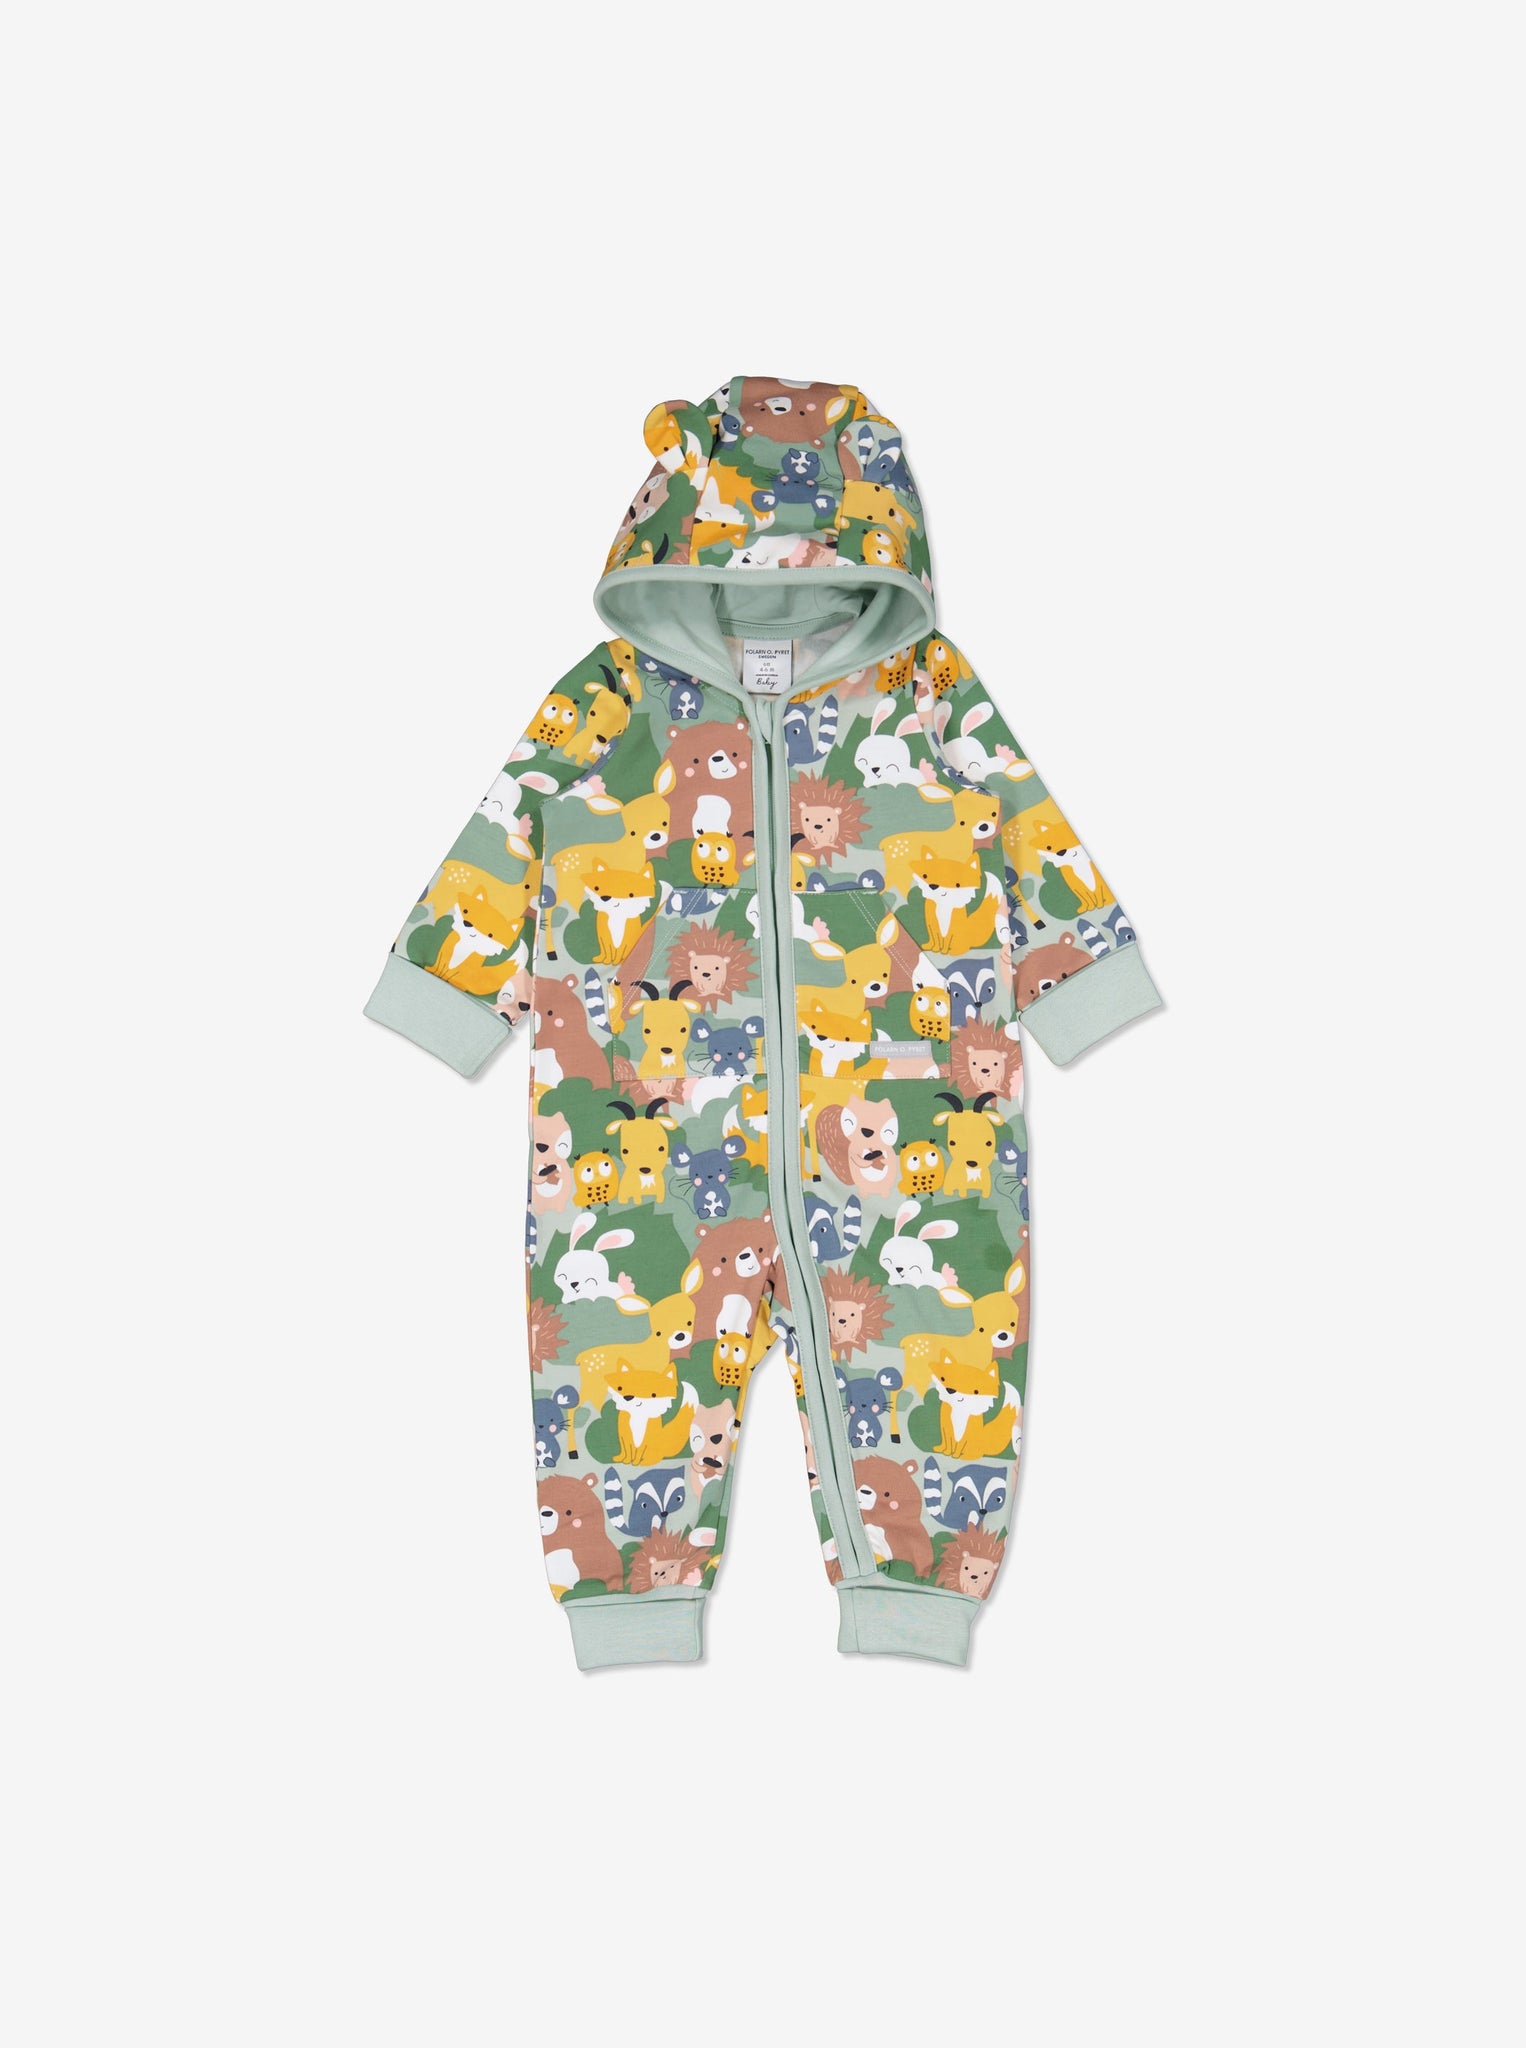  Nordic Animal Newborn All In One from Polarn O. Pyret Kidswear. Made Using GOTS Certified Organic Cotton